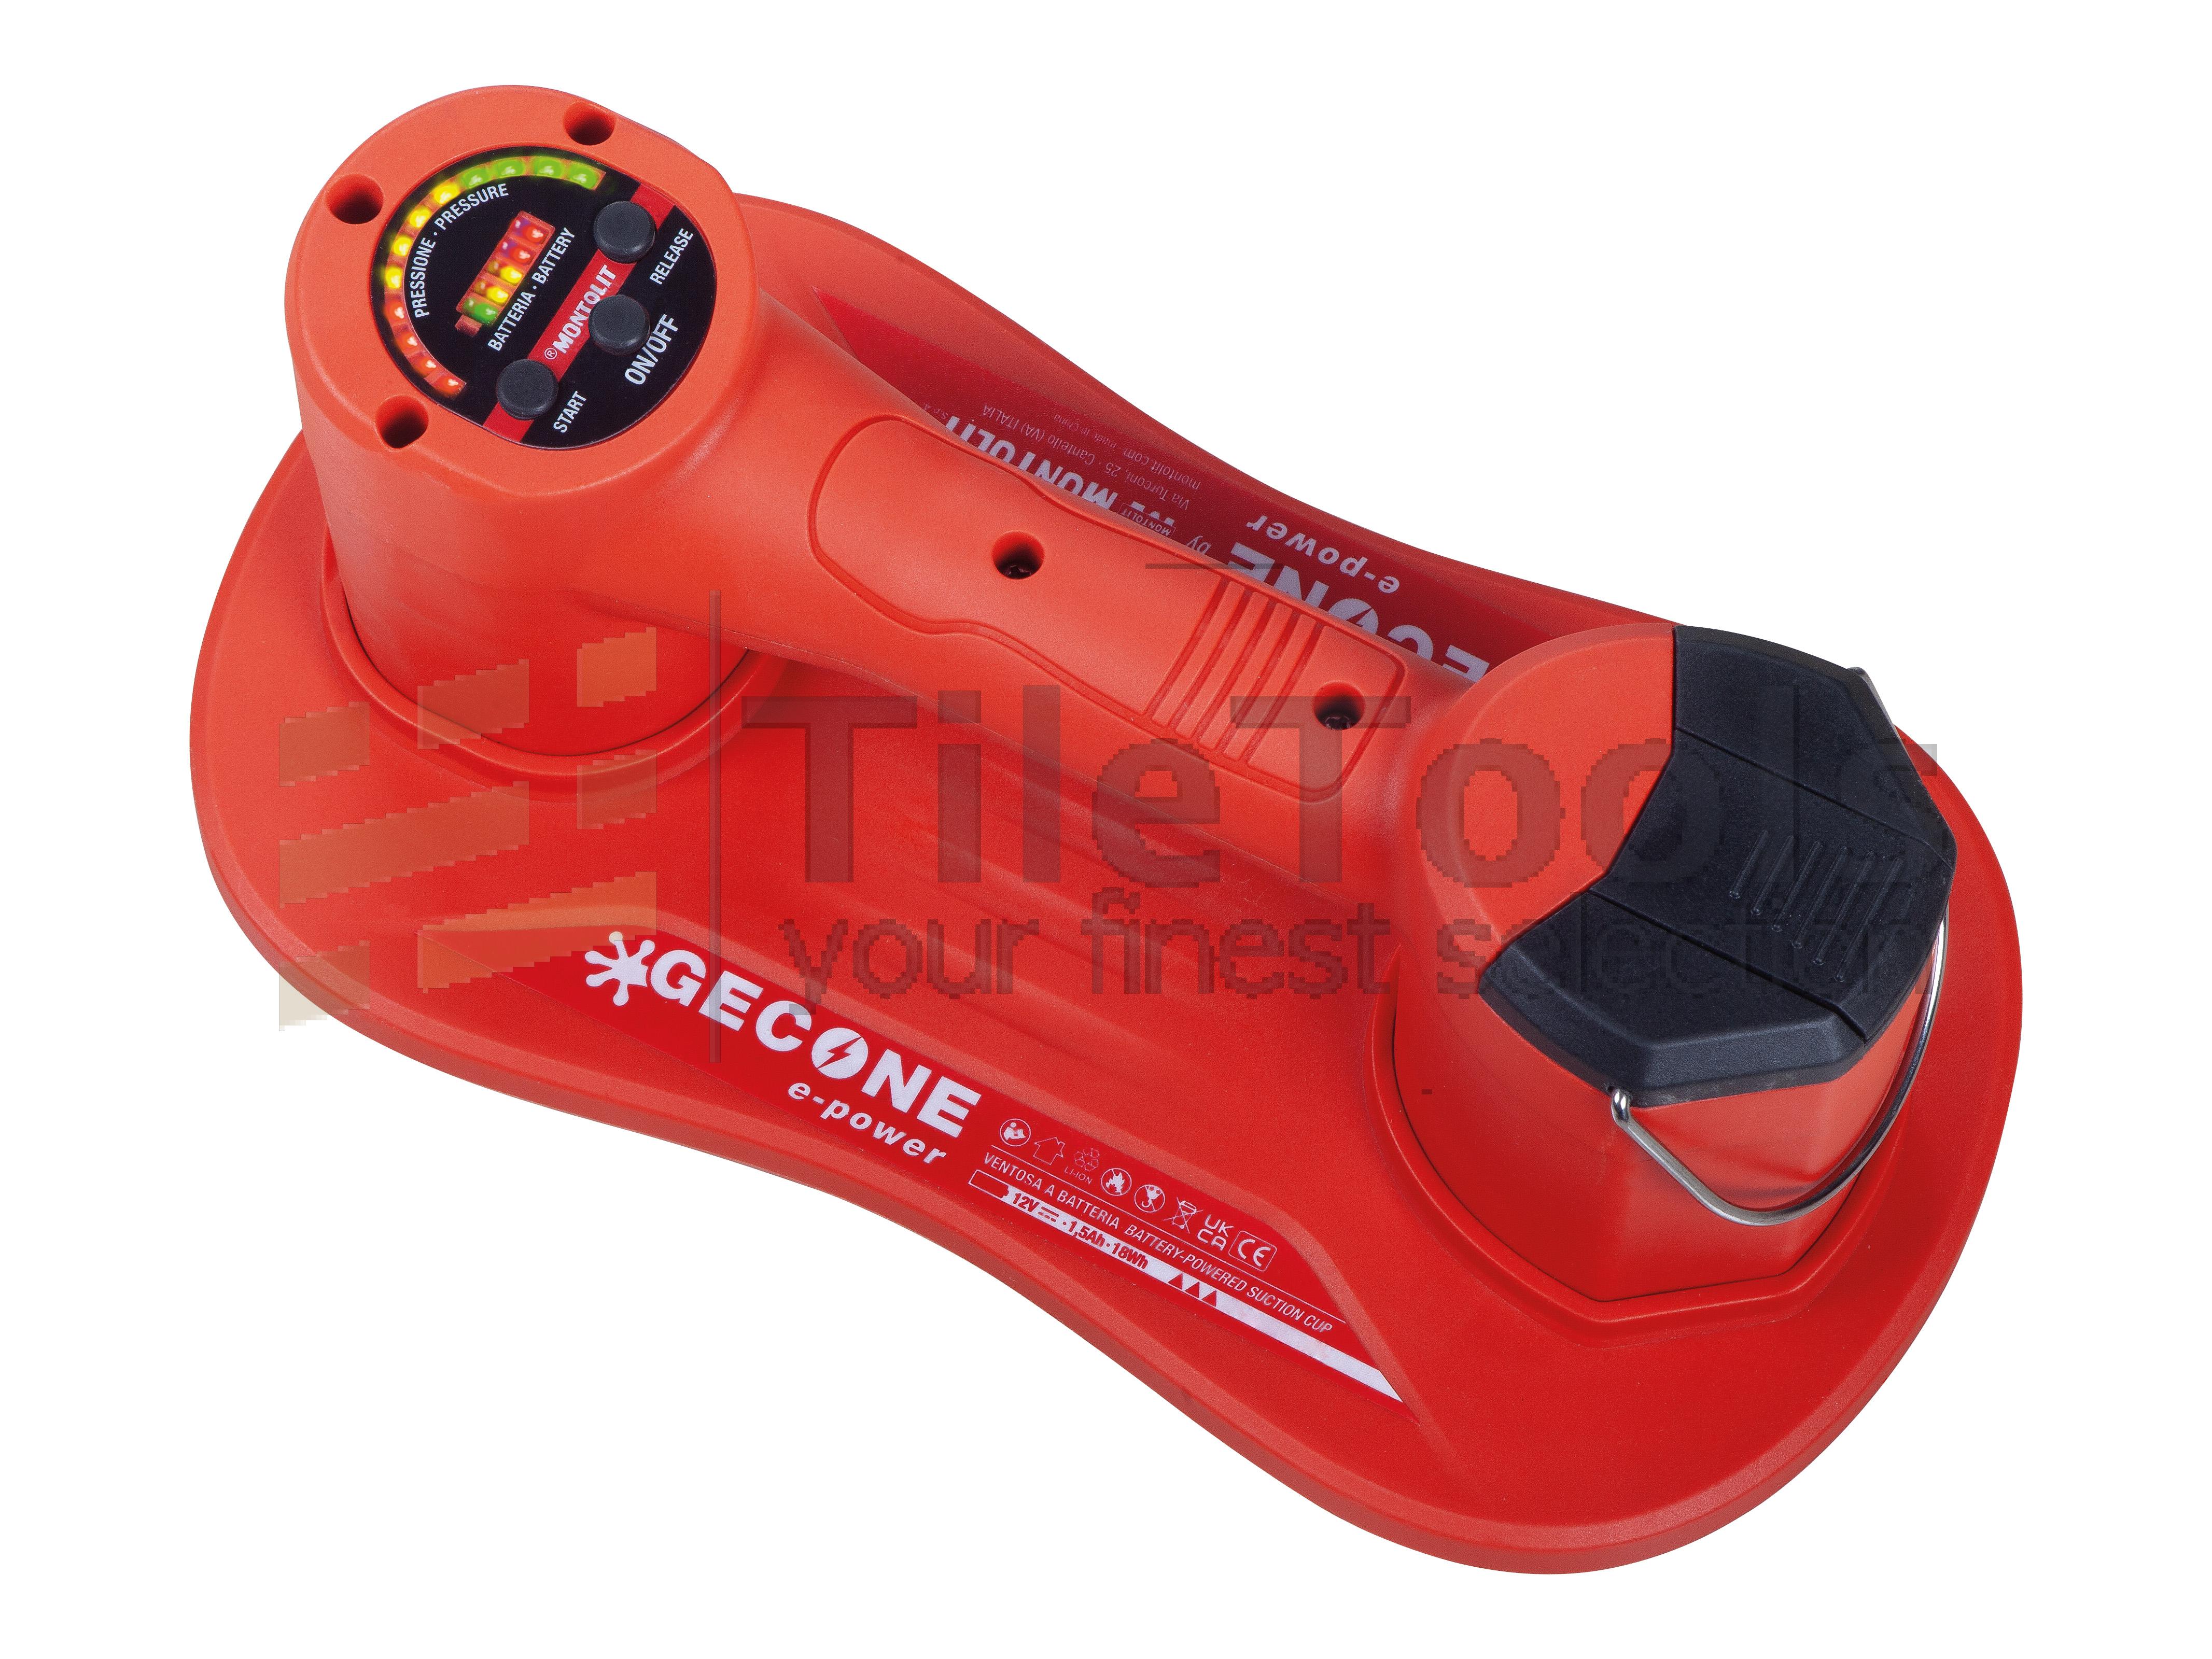 NEW Gecone e-power Suction cup